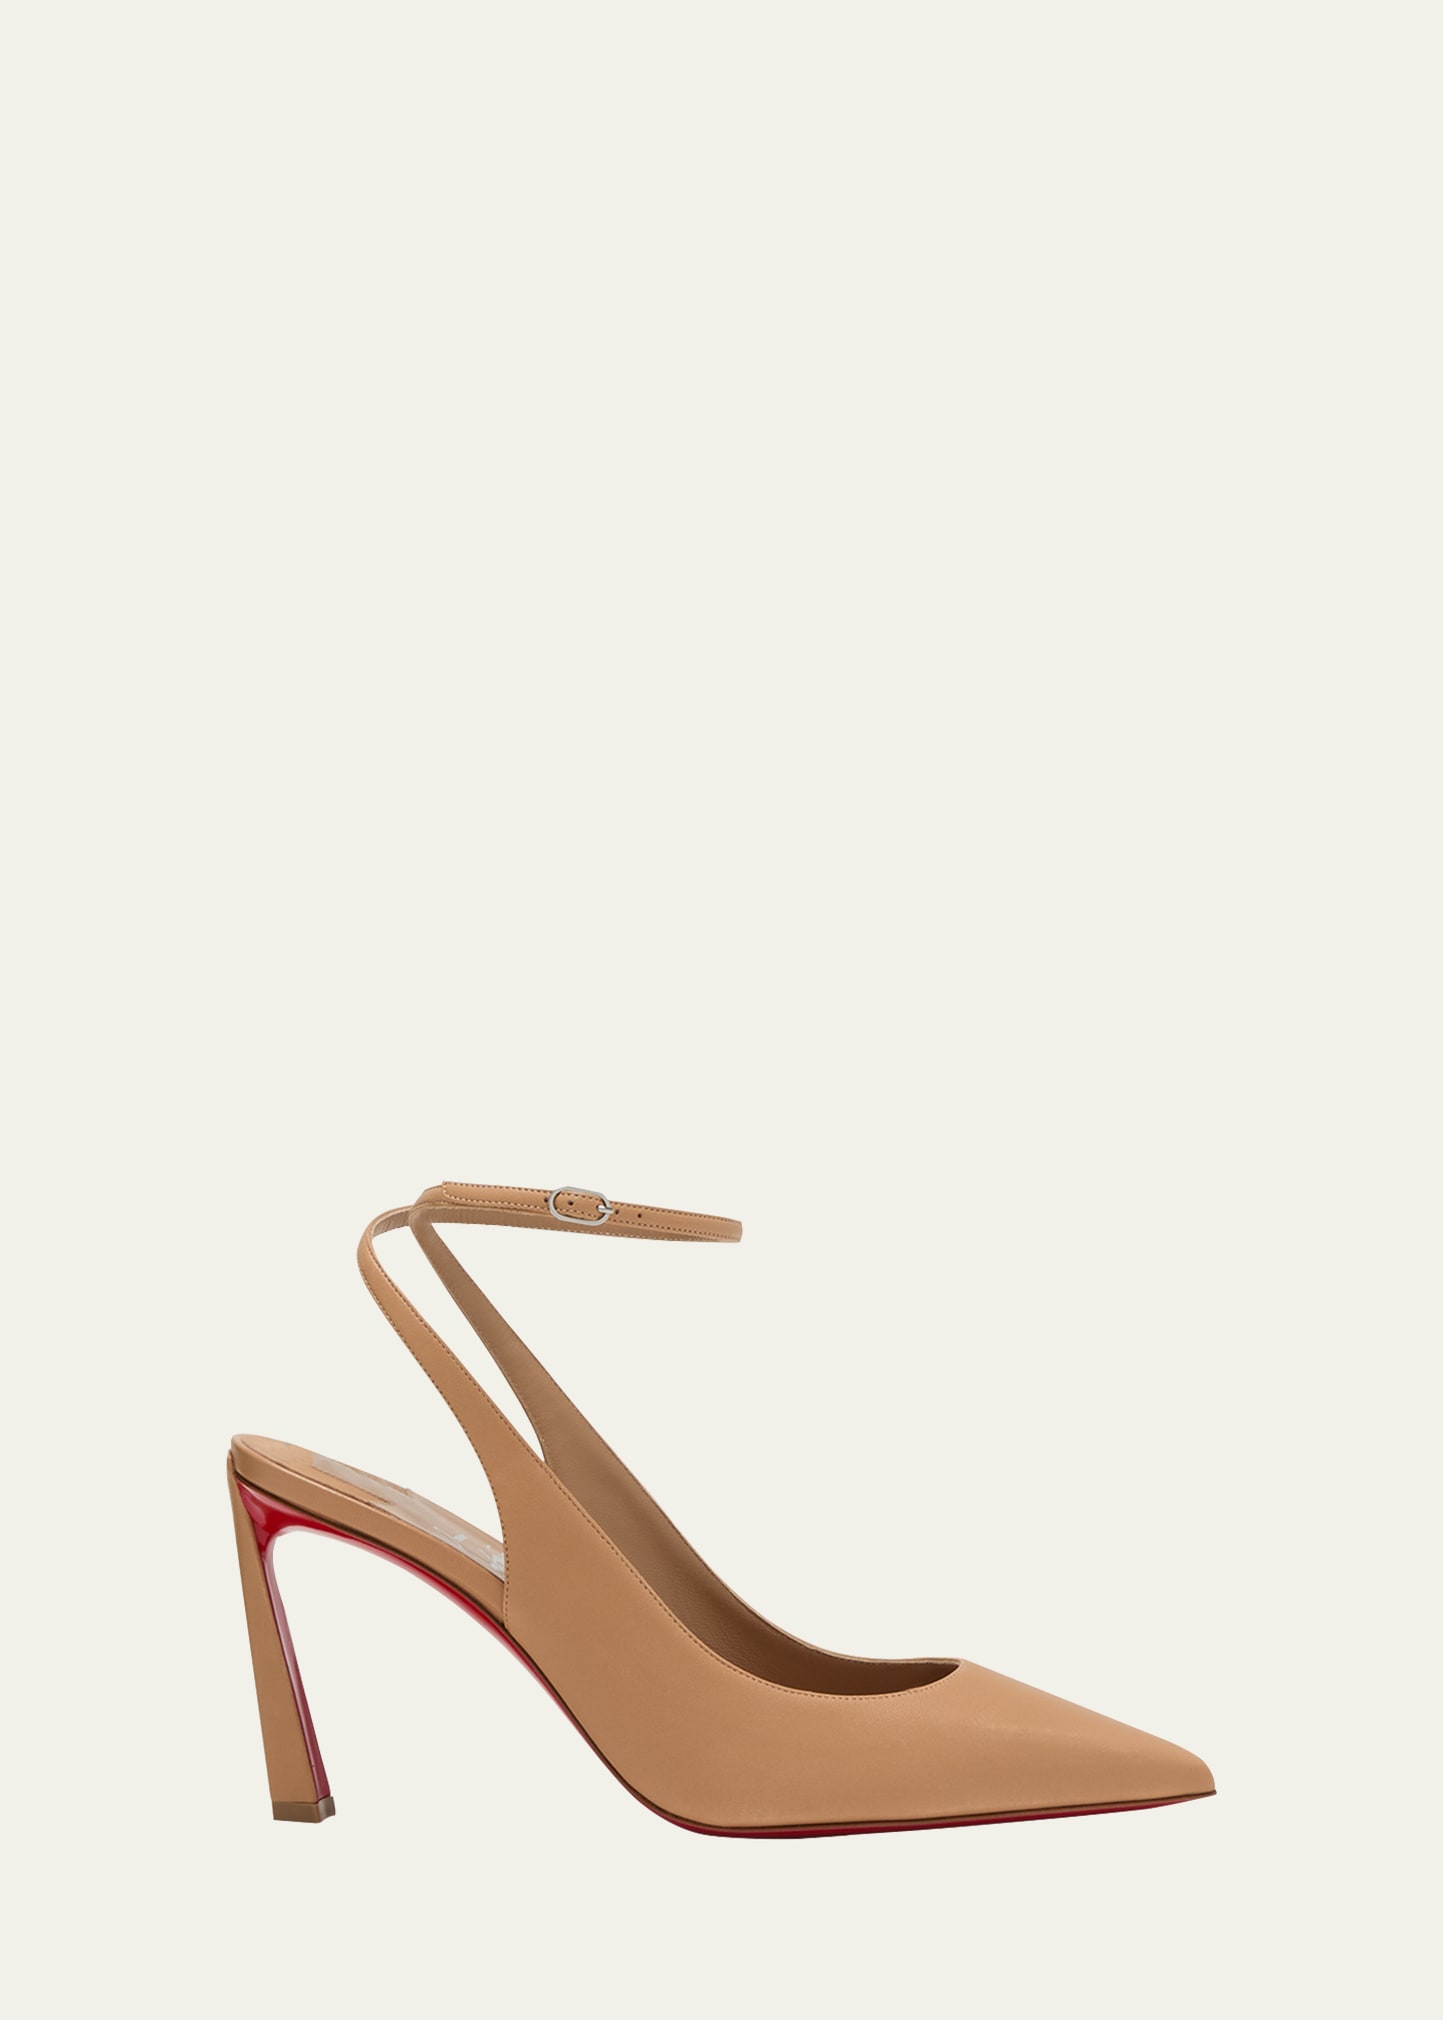 Condora Leather Red Sole Ankle-Strap Pumps